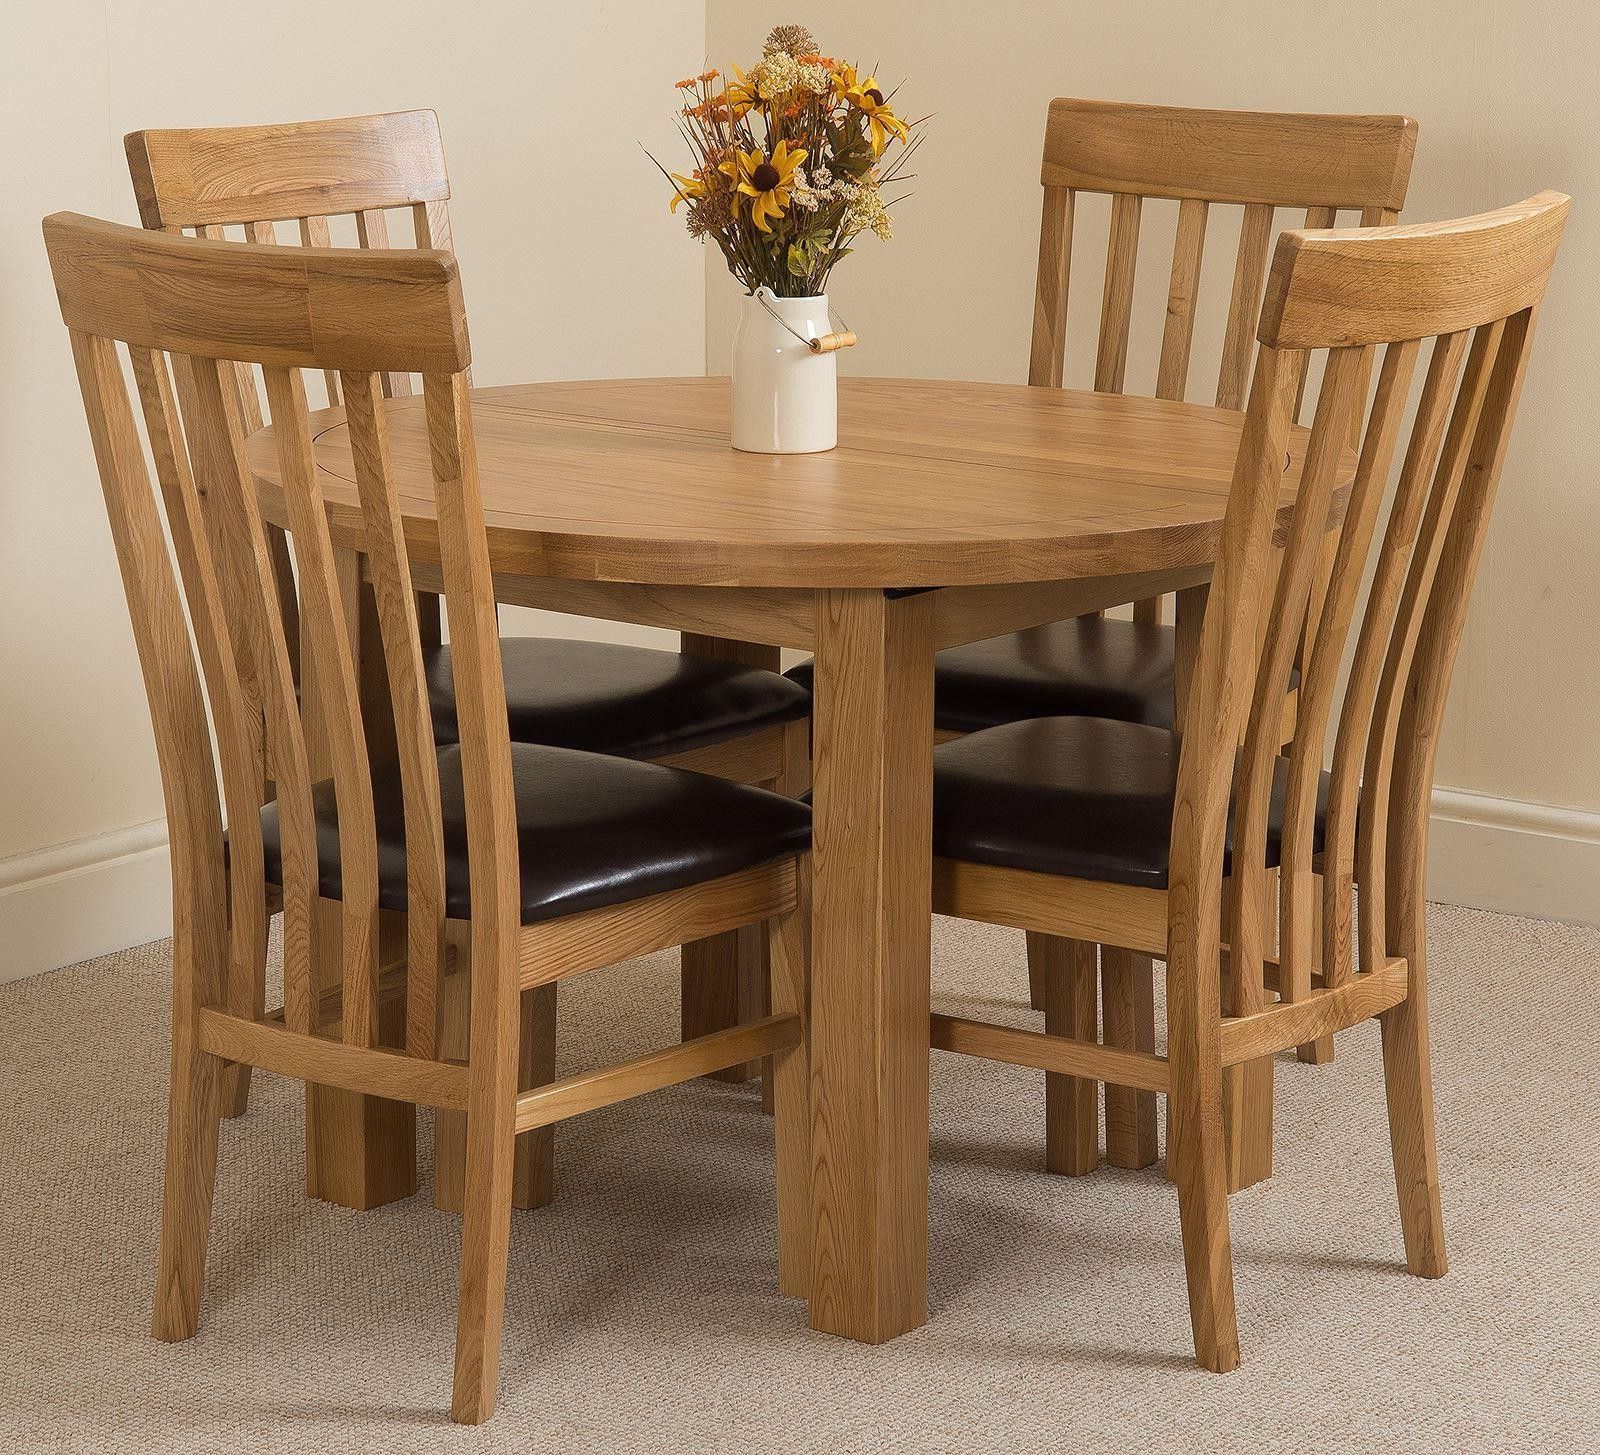 Famous Edmonton Solid Oak Extending Oval Dining Table With 4 Pertaining To Light Brown Dining Tables (View 11 of 20)